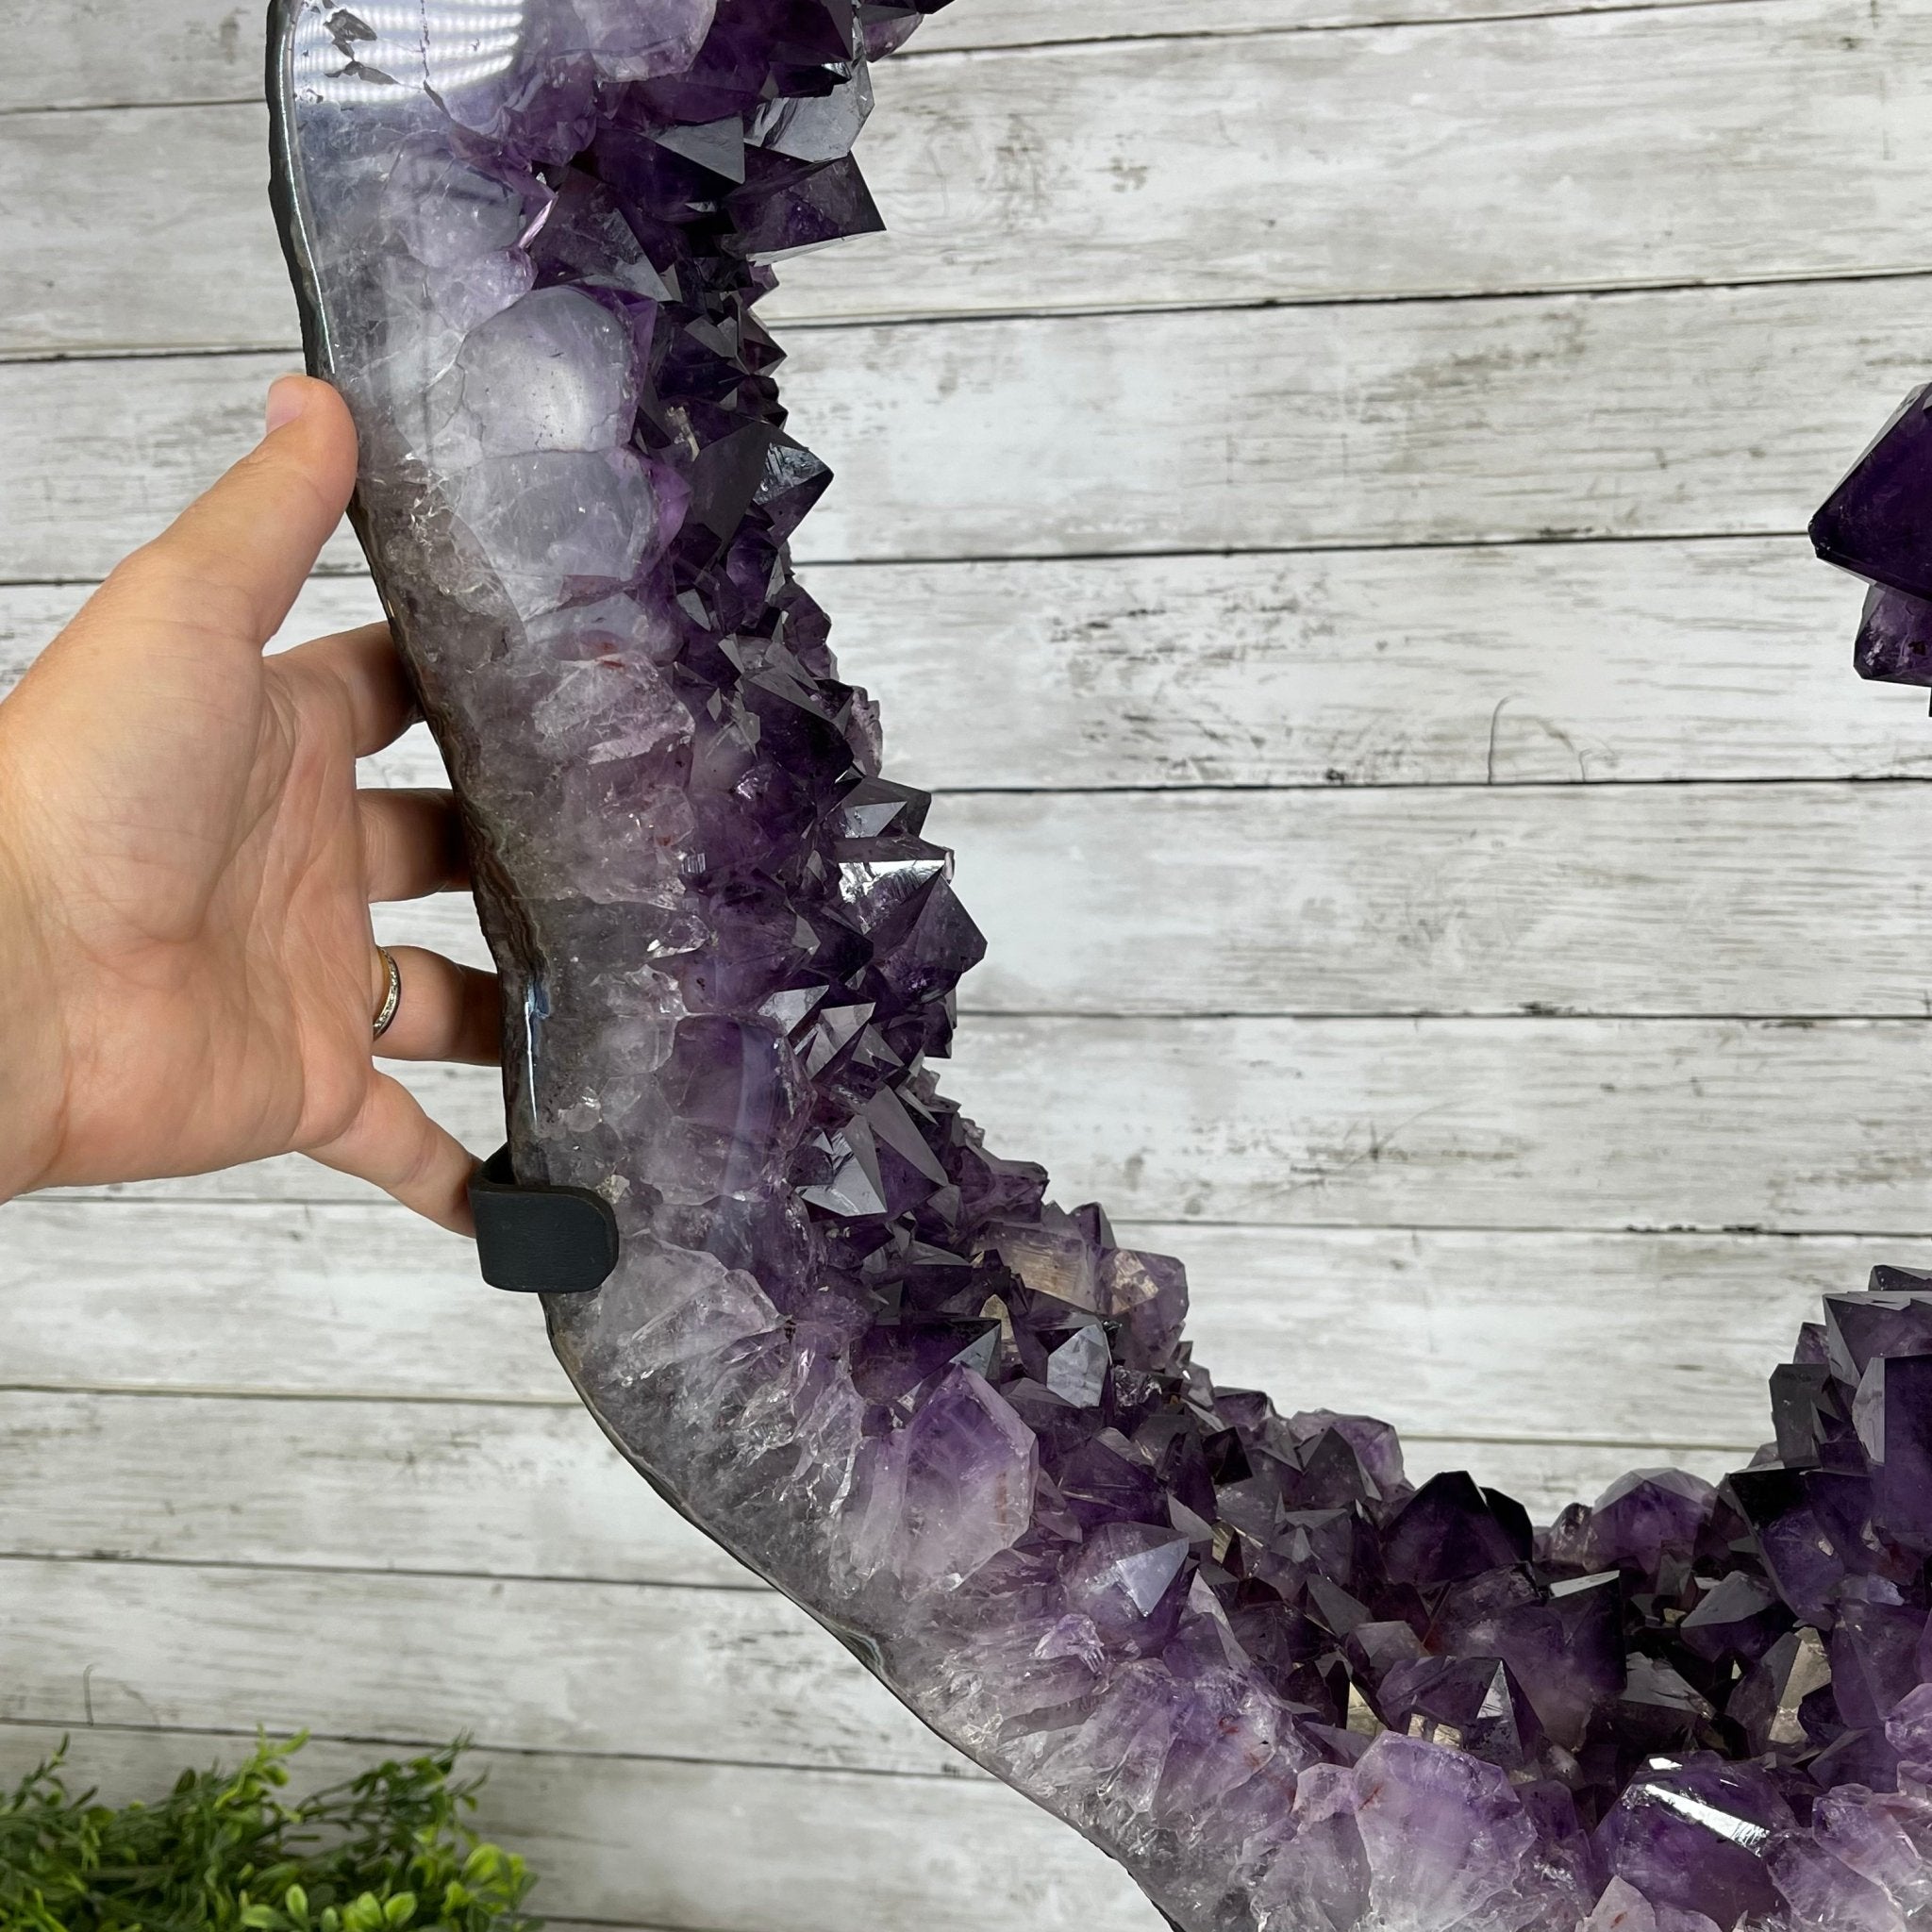 Super Quality Brazilian Amethyst Crystal Portal on a Tall Rotating Stand, 114.7 lbs & 70.5" tall Model #5604-0101 by Brazil Gems - Brazil GemsBrazil GemsSuper Quality Brazilian Amethyst Crystal Portal on a Tall Rotating Stand, 114.7 lbs & 70.5" tall Model #5604-0101 by Brazil GemsPortals on Rotating Bases5604-0101